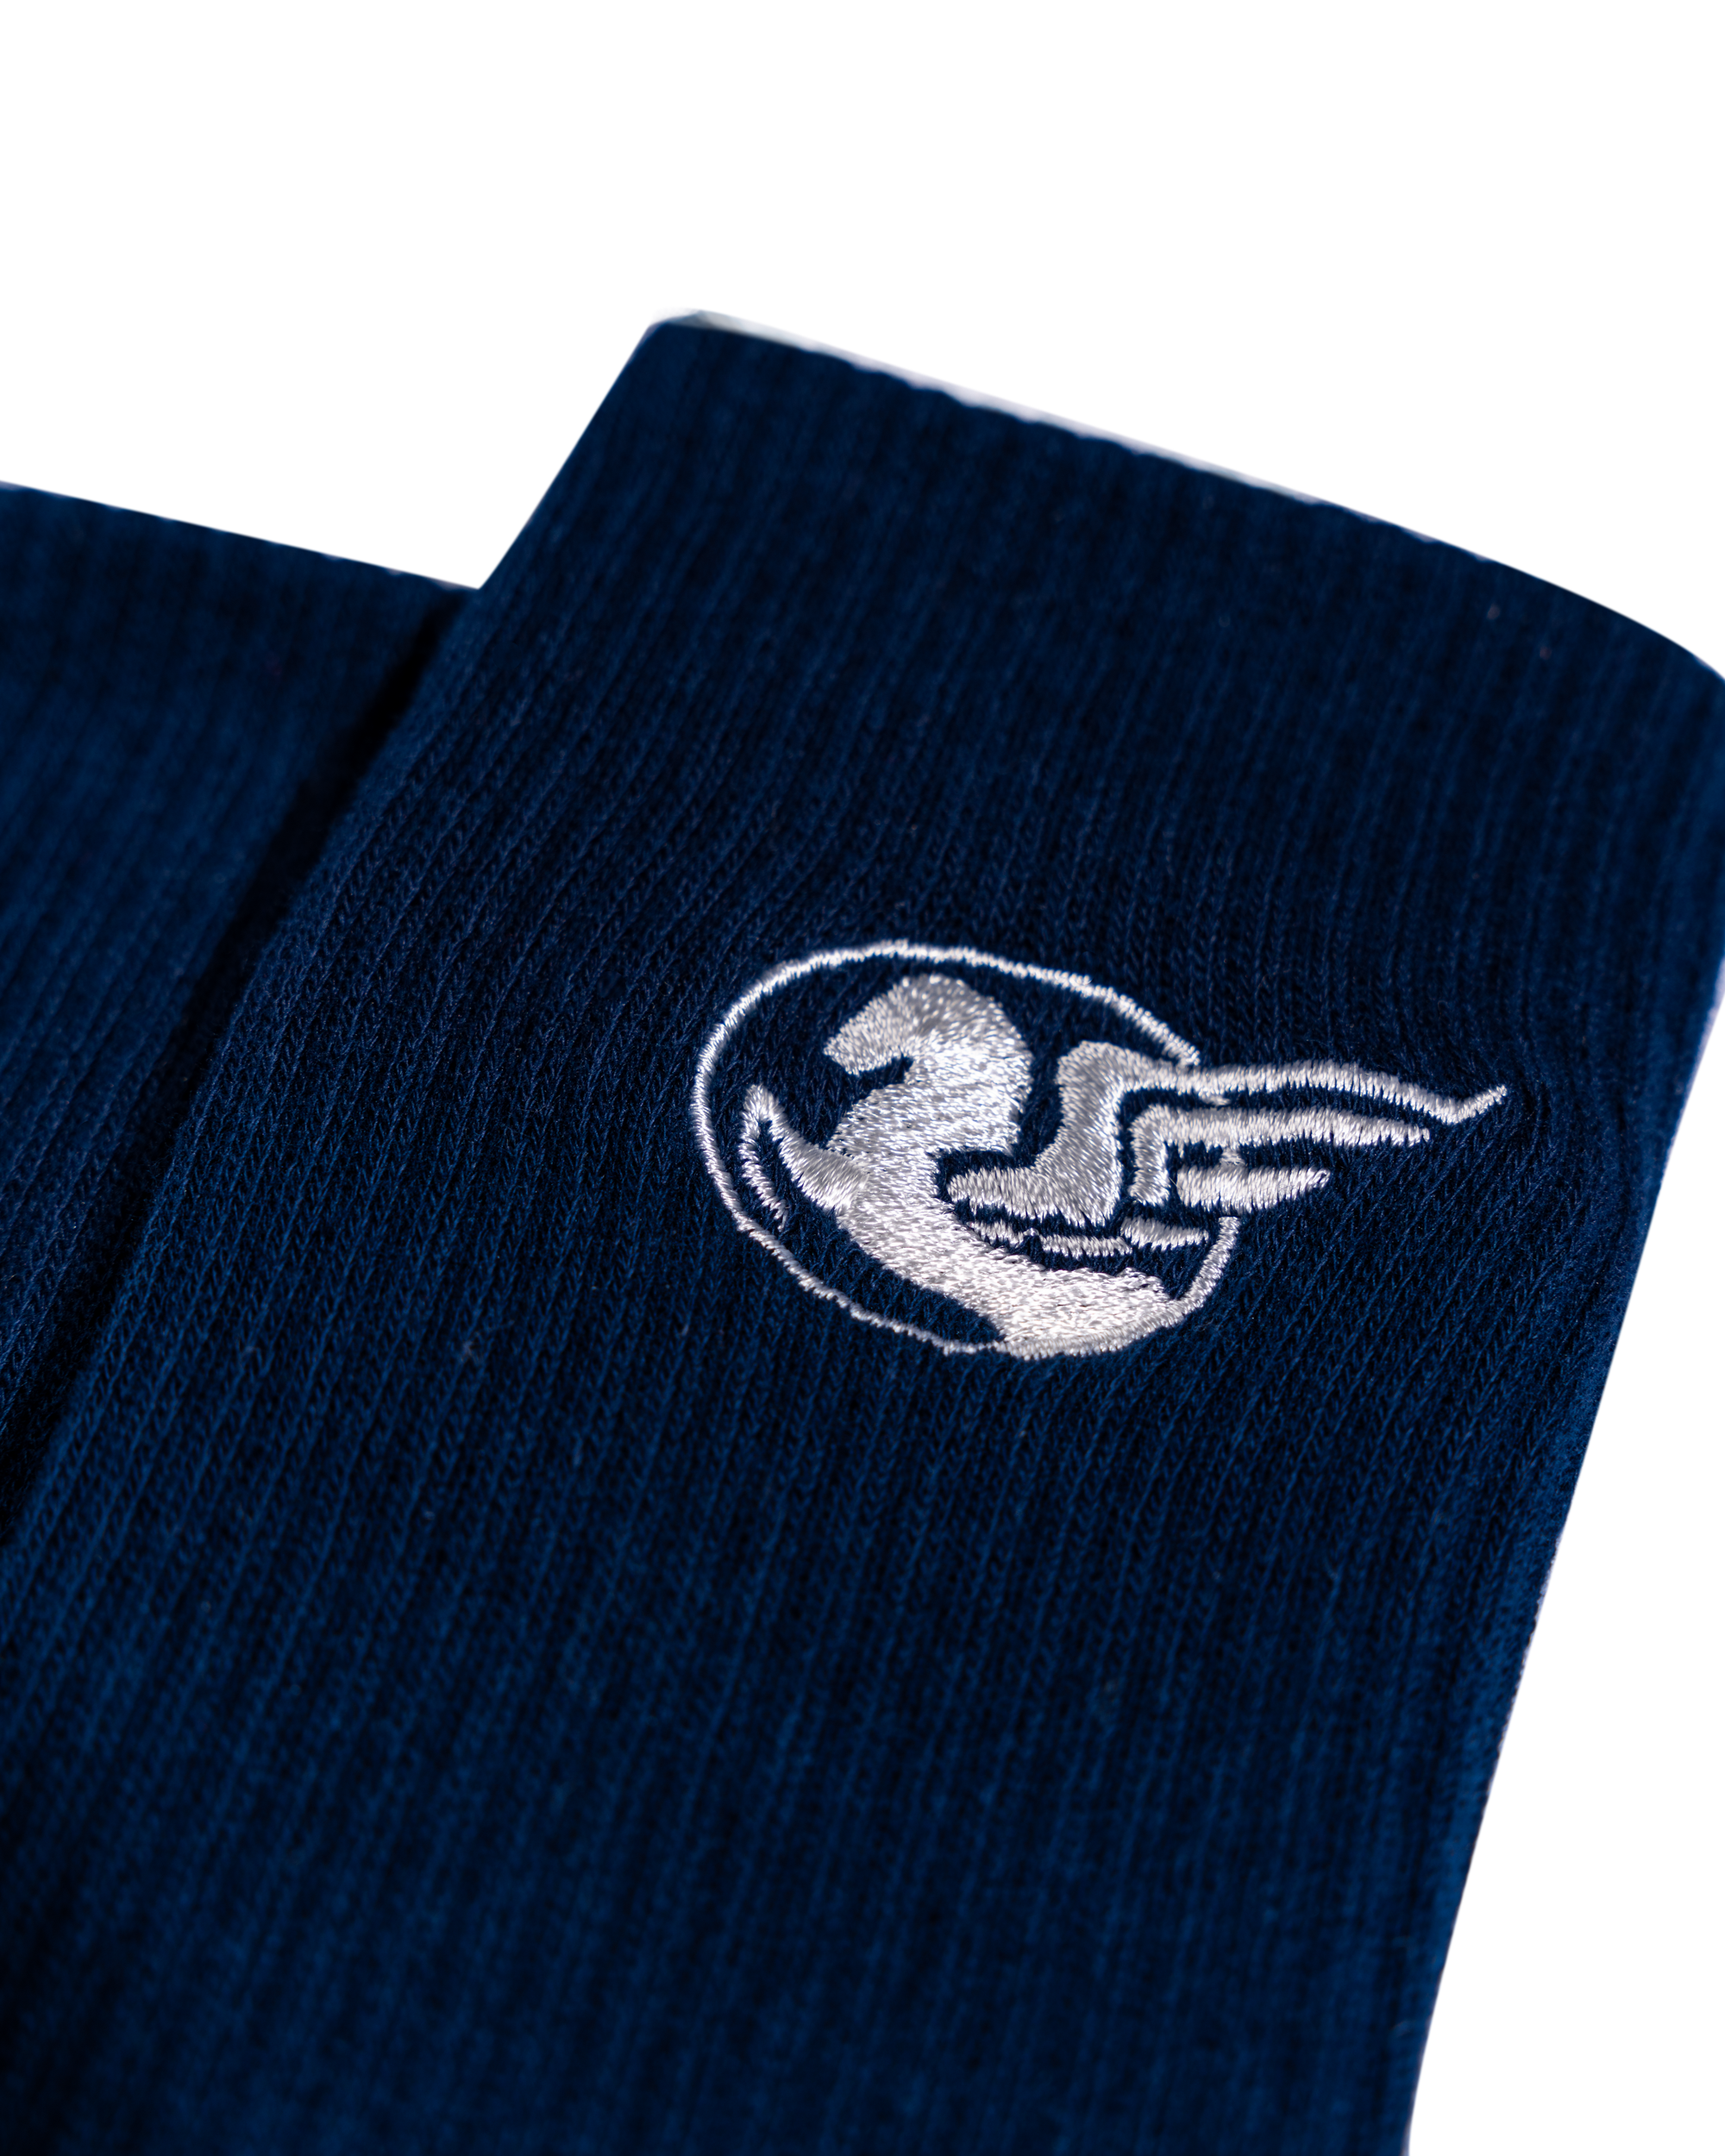 "Pégase" embroidered socks navy